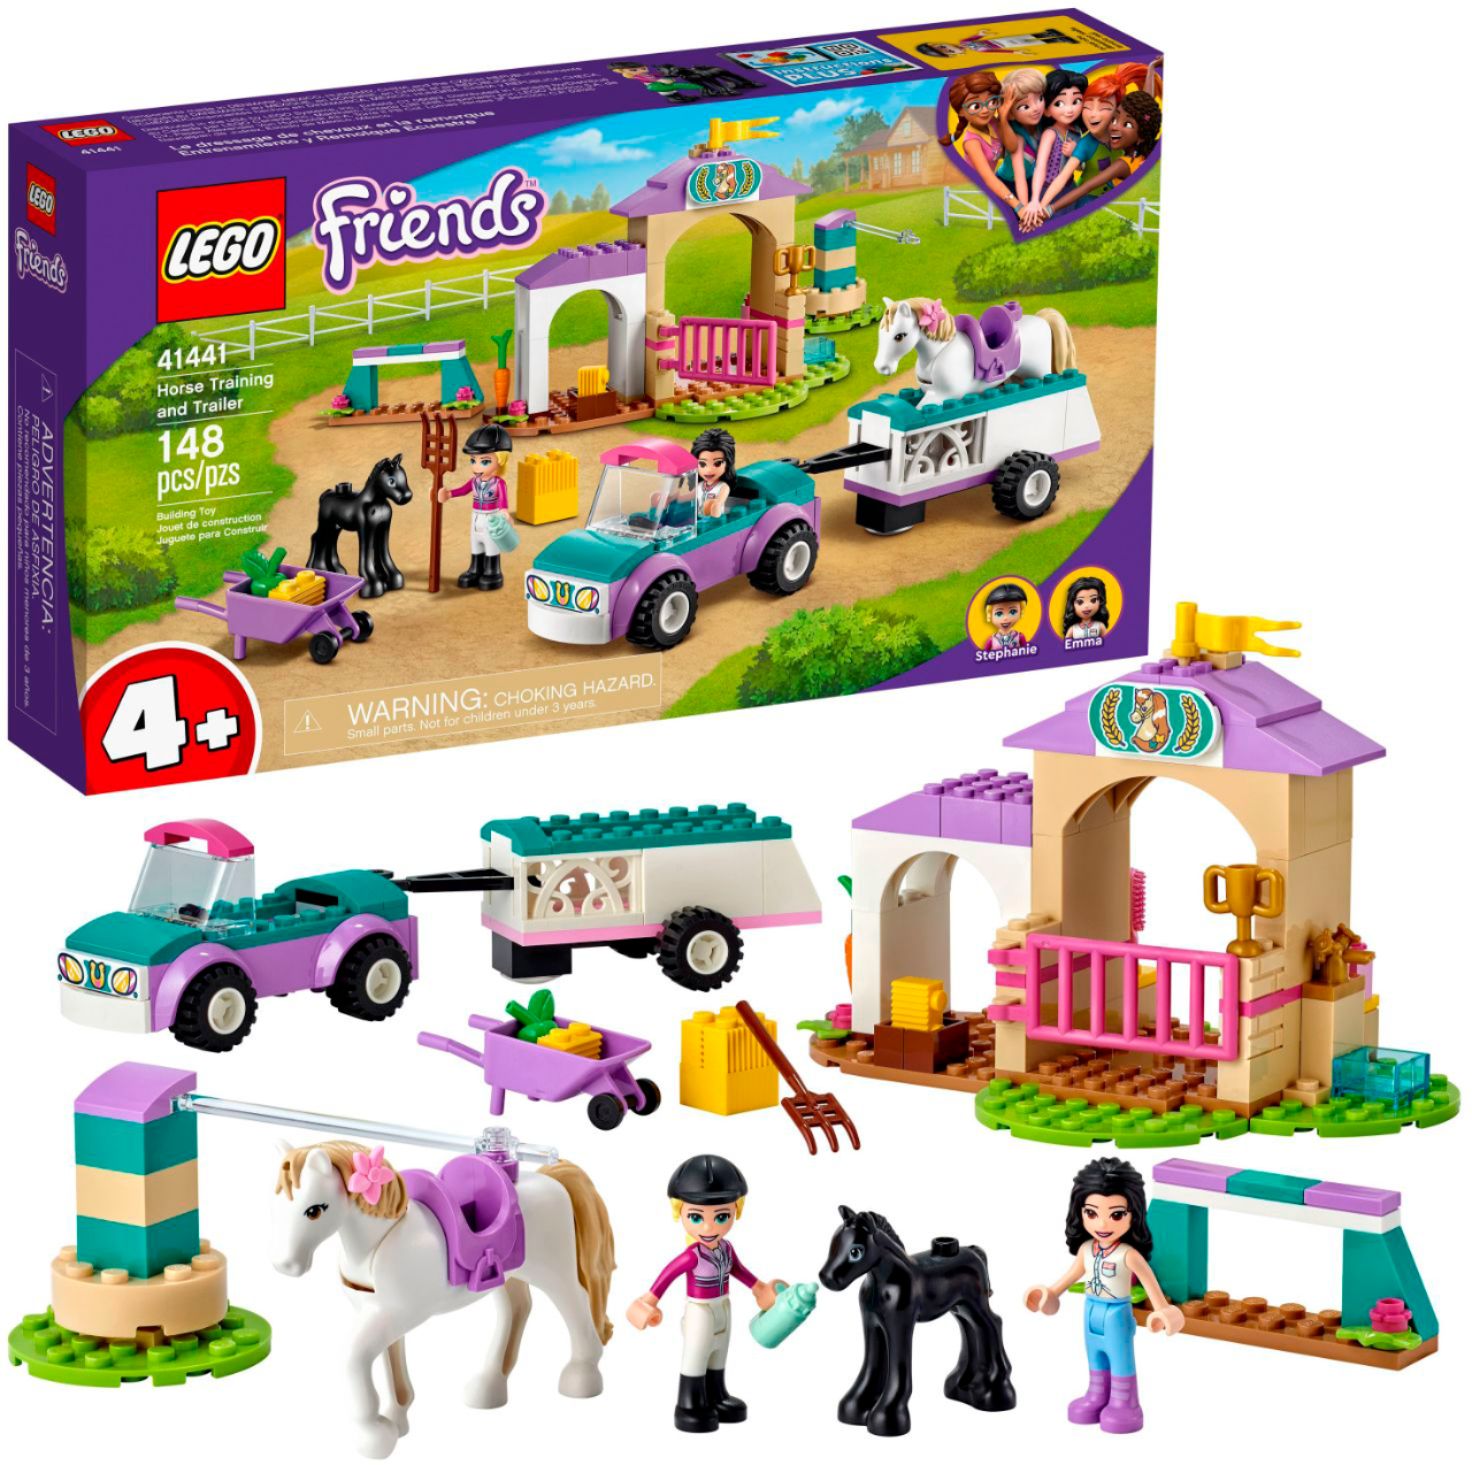 LEGO Friends Horse Training and Trailer 41441 6332915 Best Buy